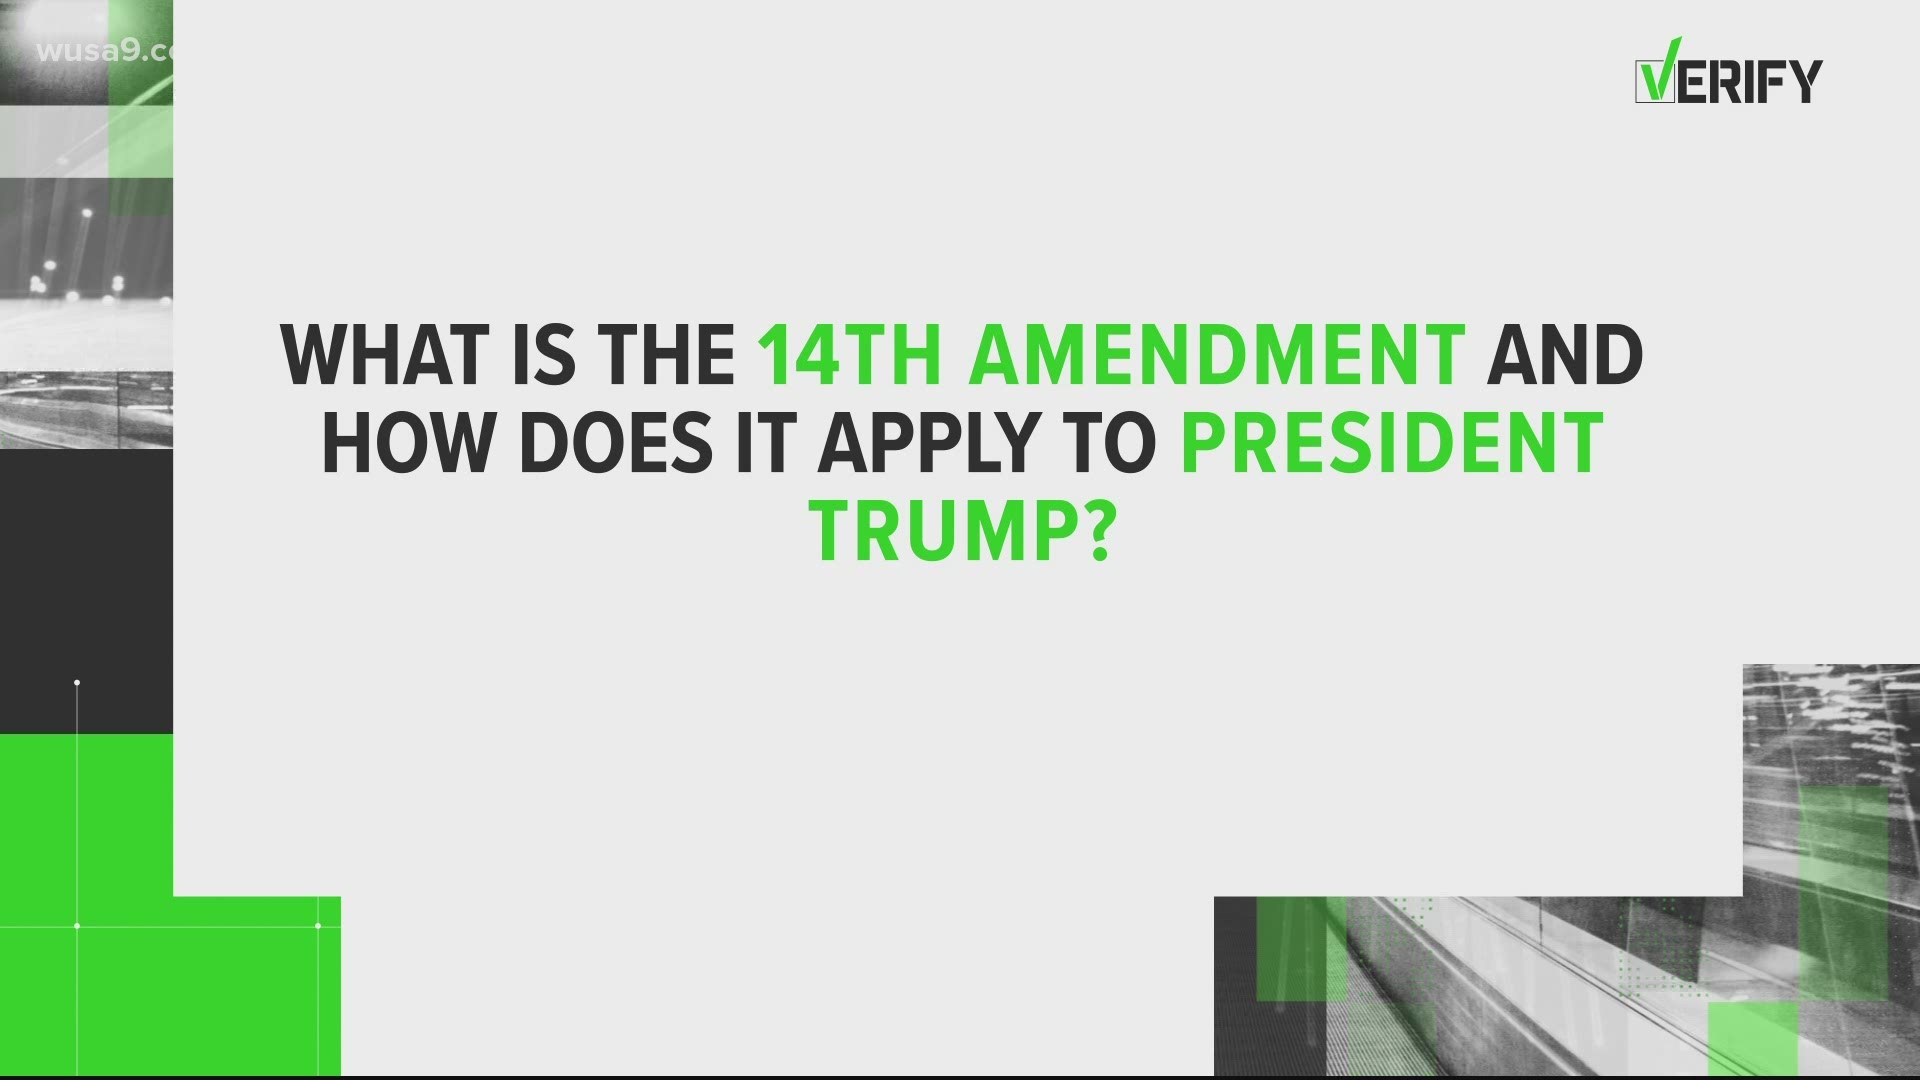 The Verify team talked to an expert about a forgotten amendment that could impact President Donald Trump.